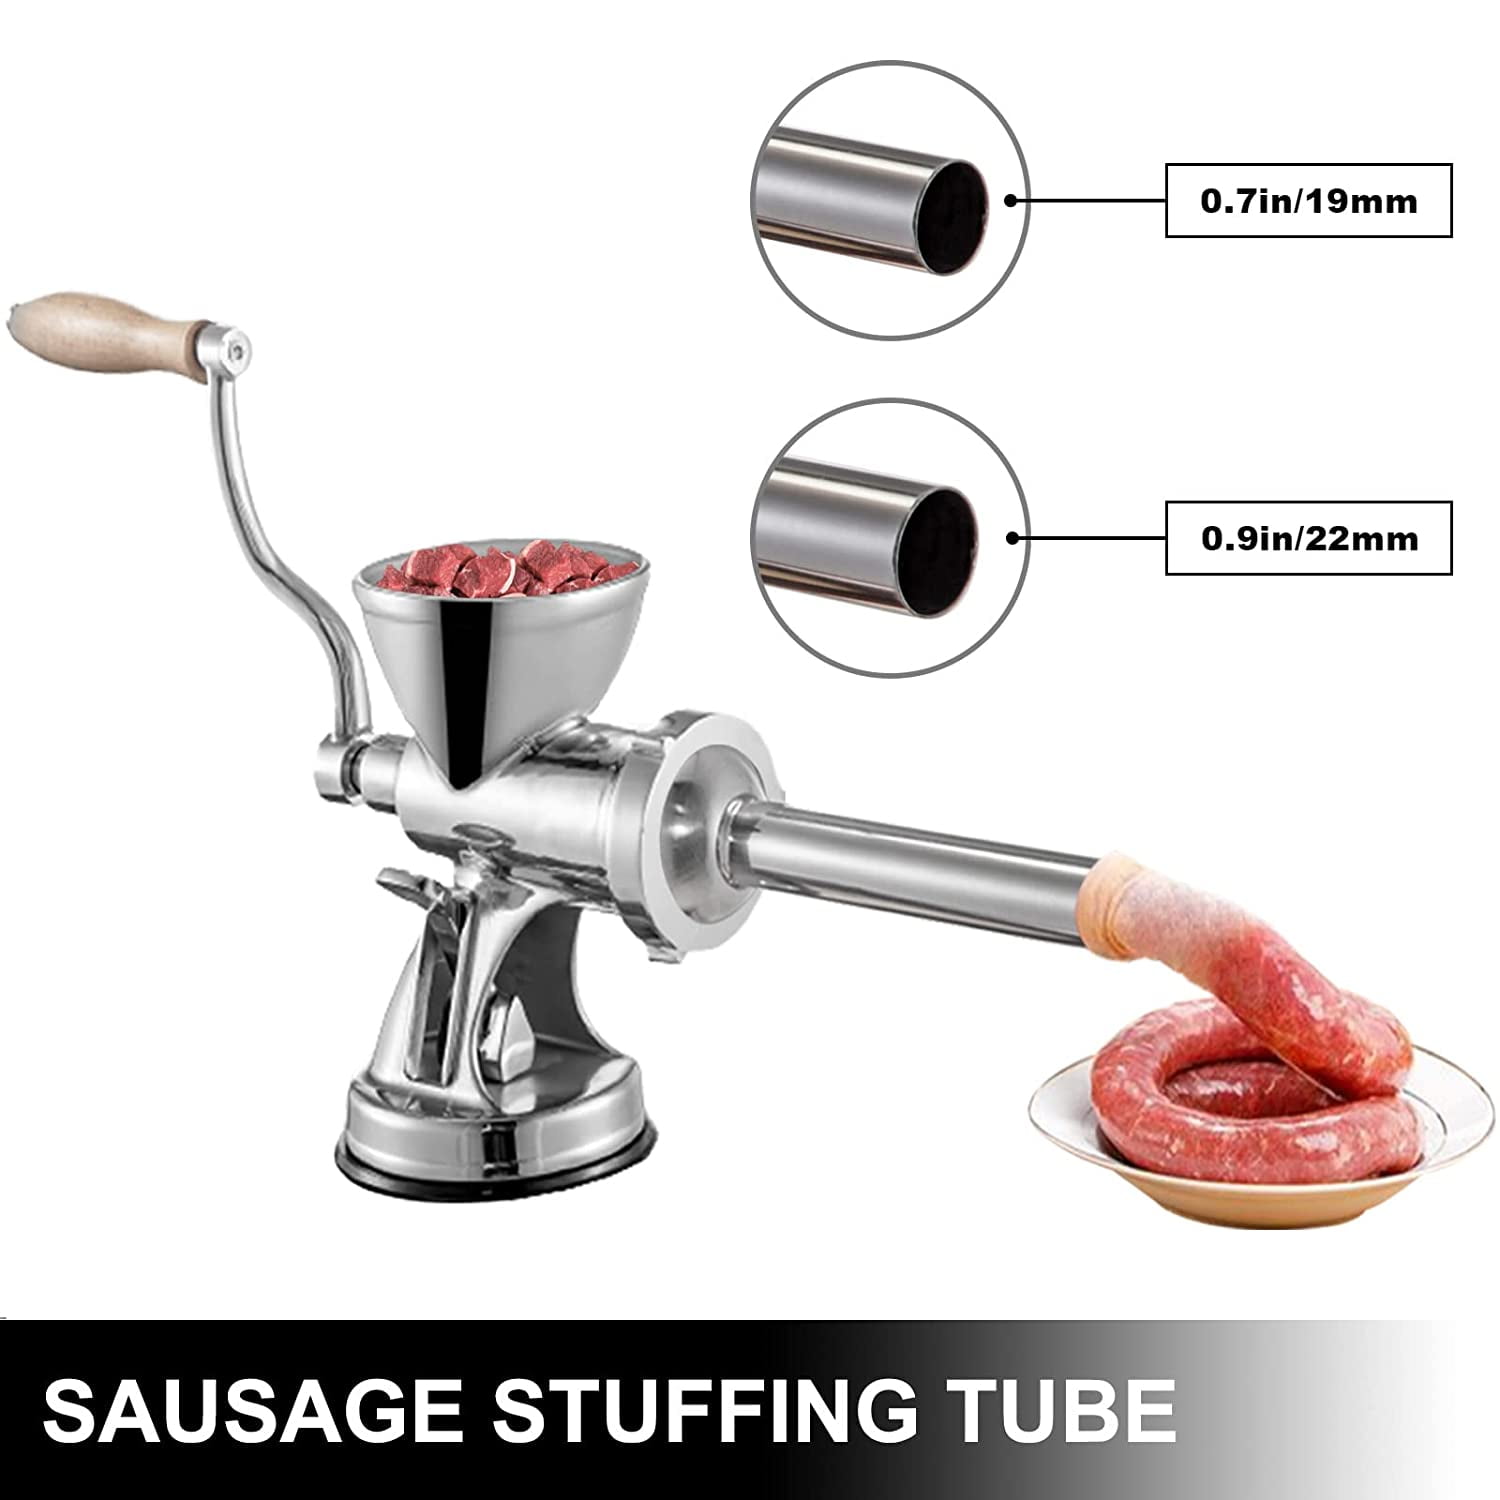 VEVOR Meat Grinder Manual 304 Stainless Steel Hand Operated Meat Grinder  Multifunctional Crank Sausage Maker Coffee Powder - #5 - Yahoo Shopping